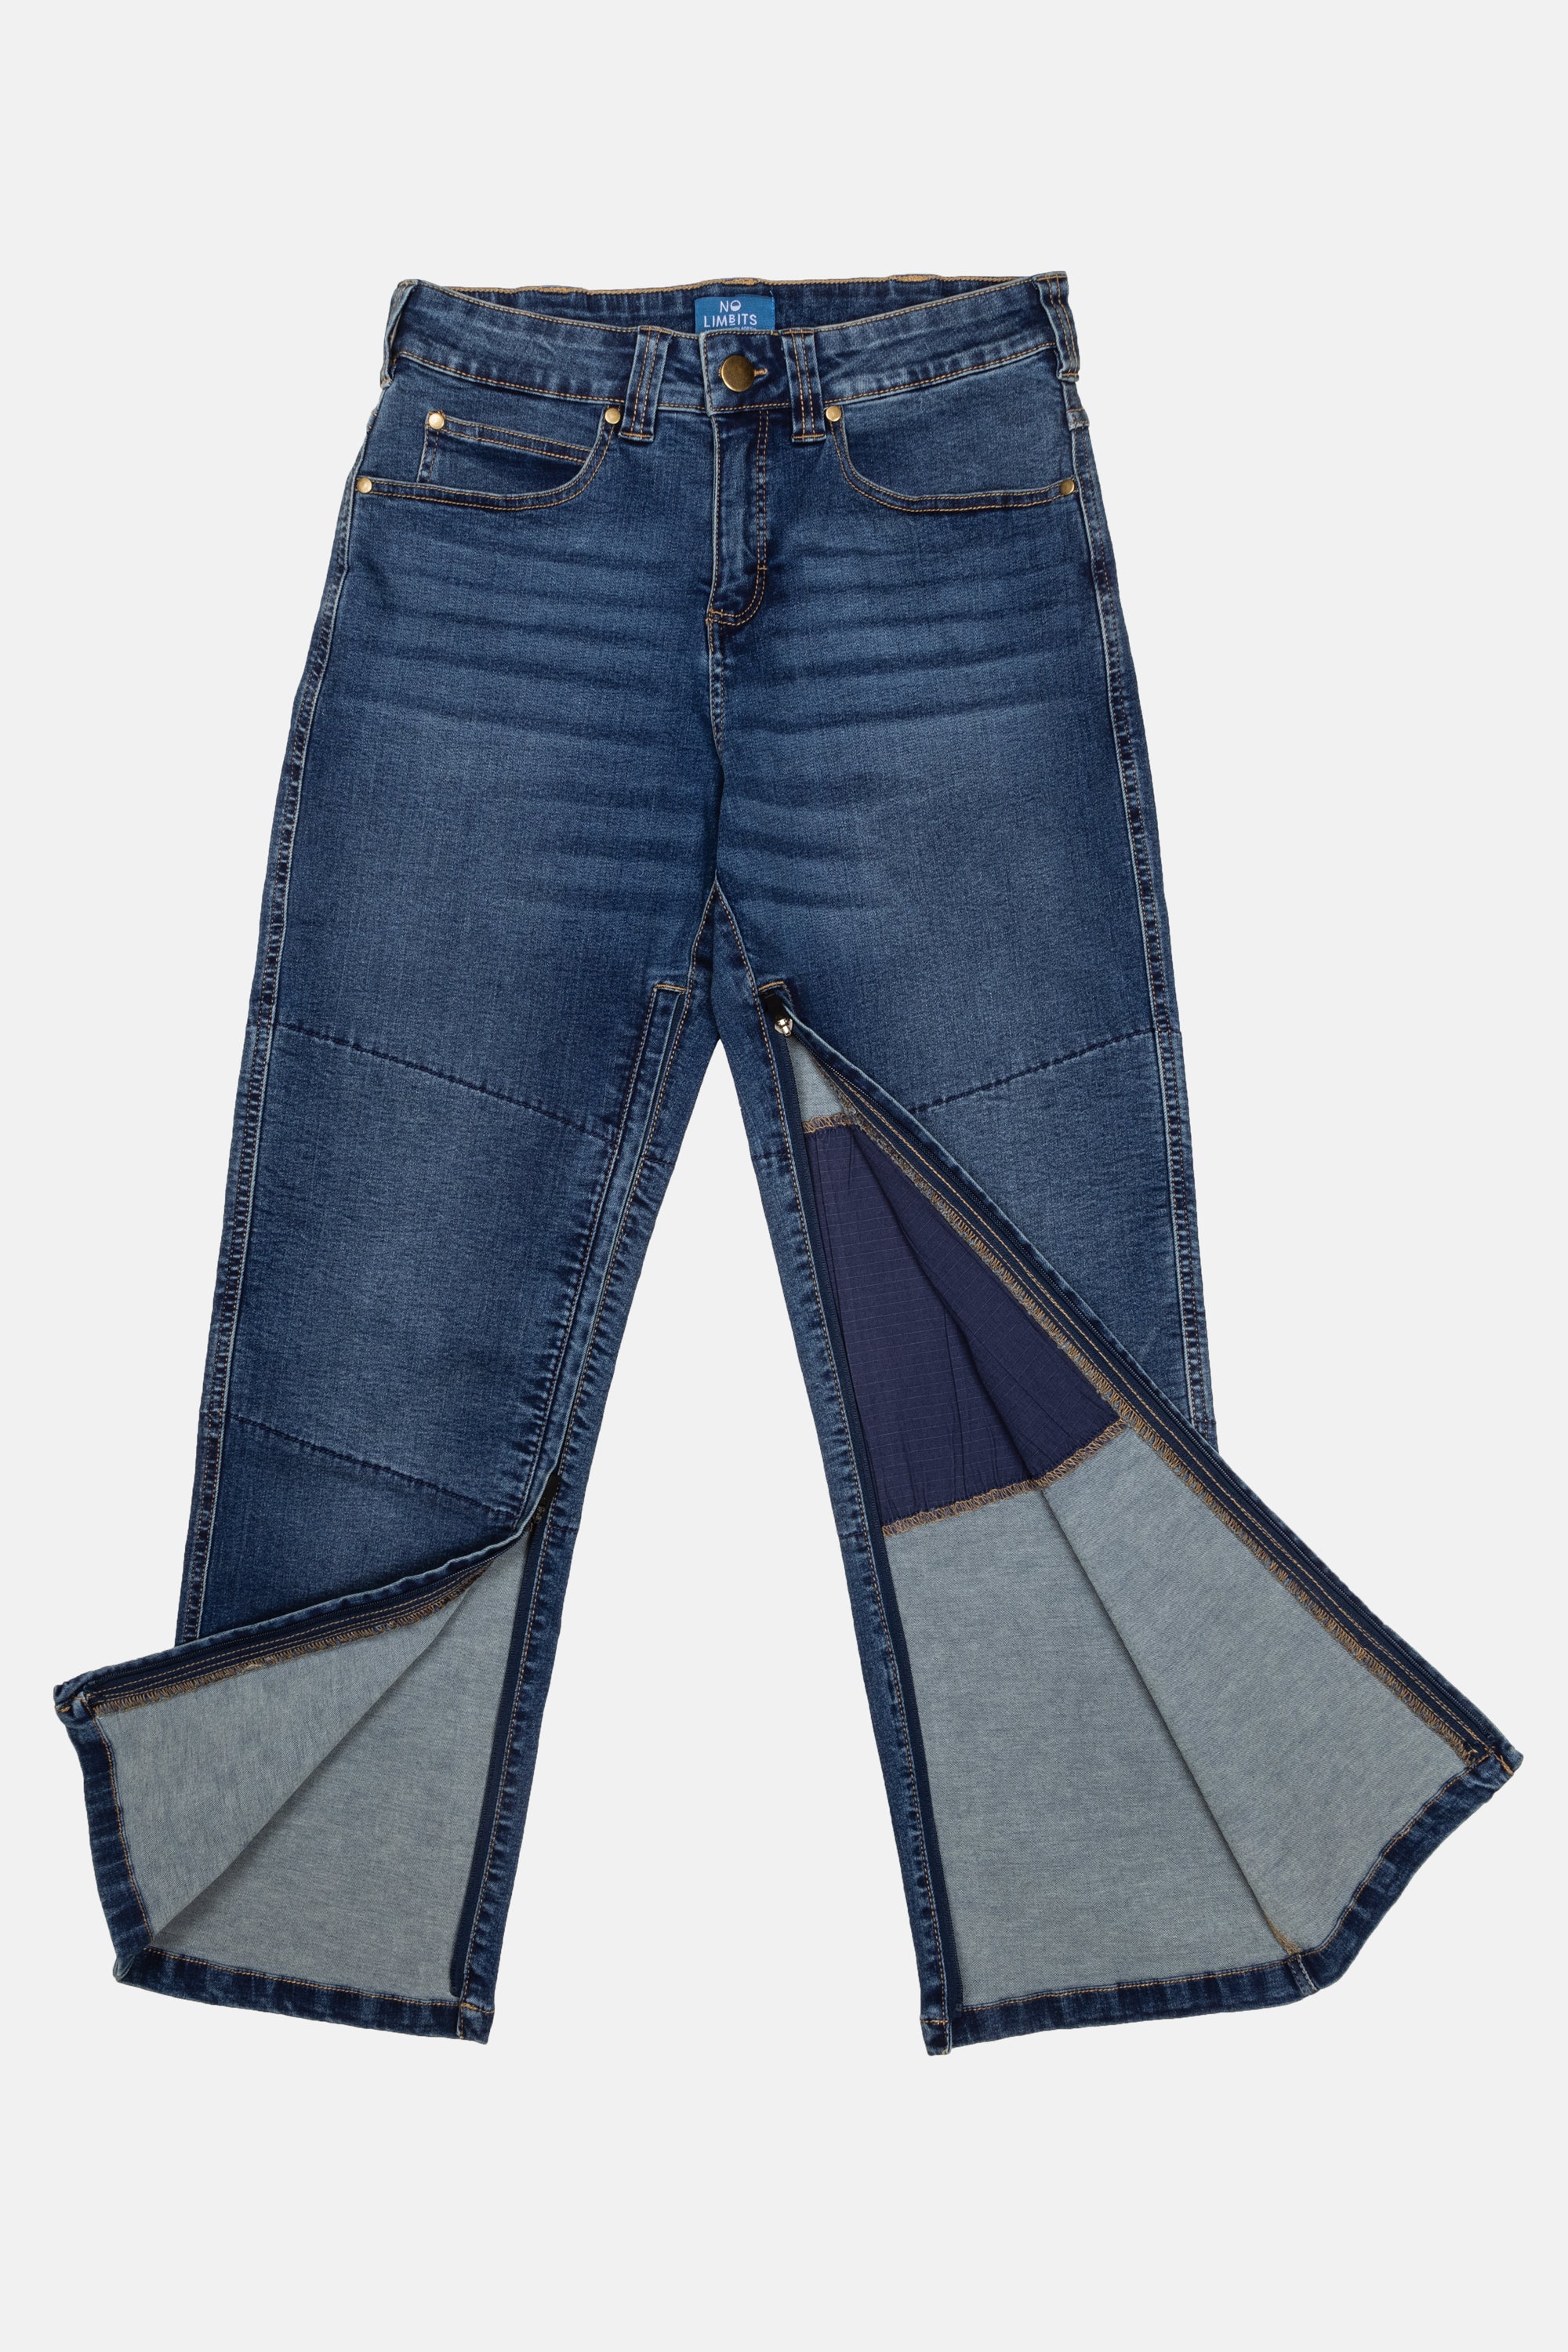 The No Limbits Adaptive Women's Dark Wash Unlimbited Pants, which zips from the ankles.